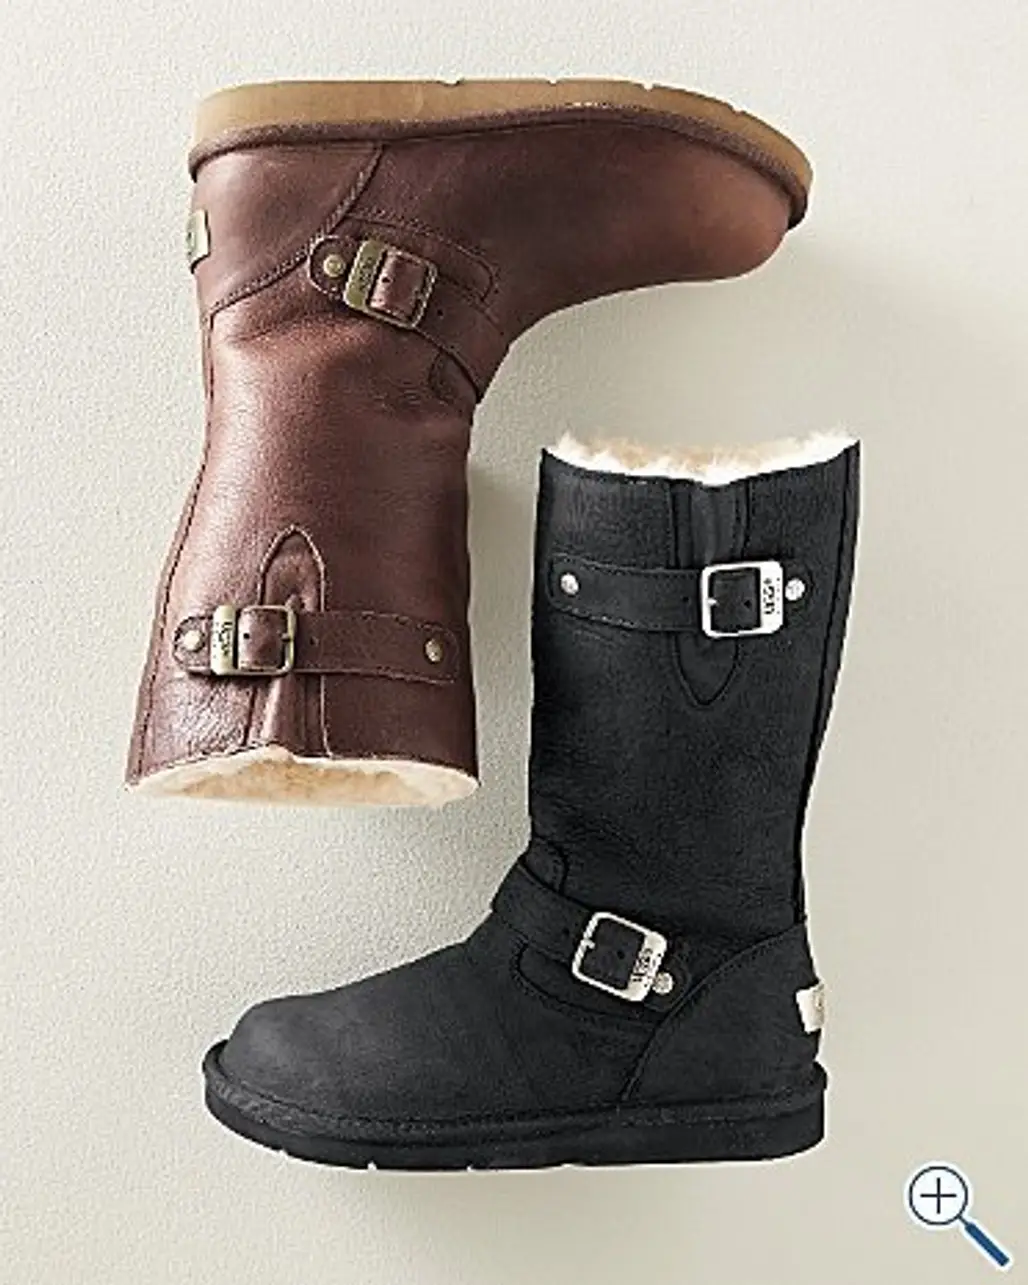 boot,footwear,shoe,leather,riding boot,